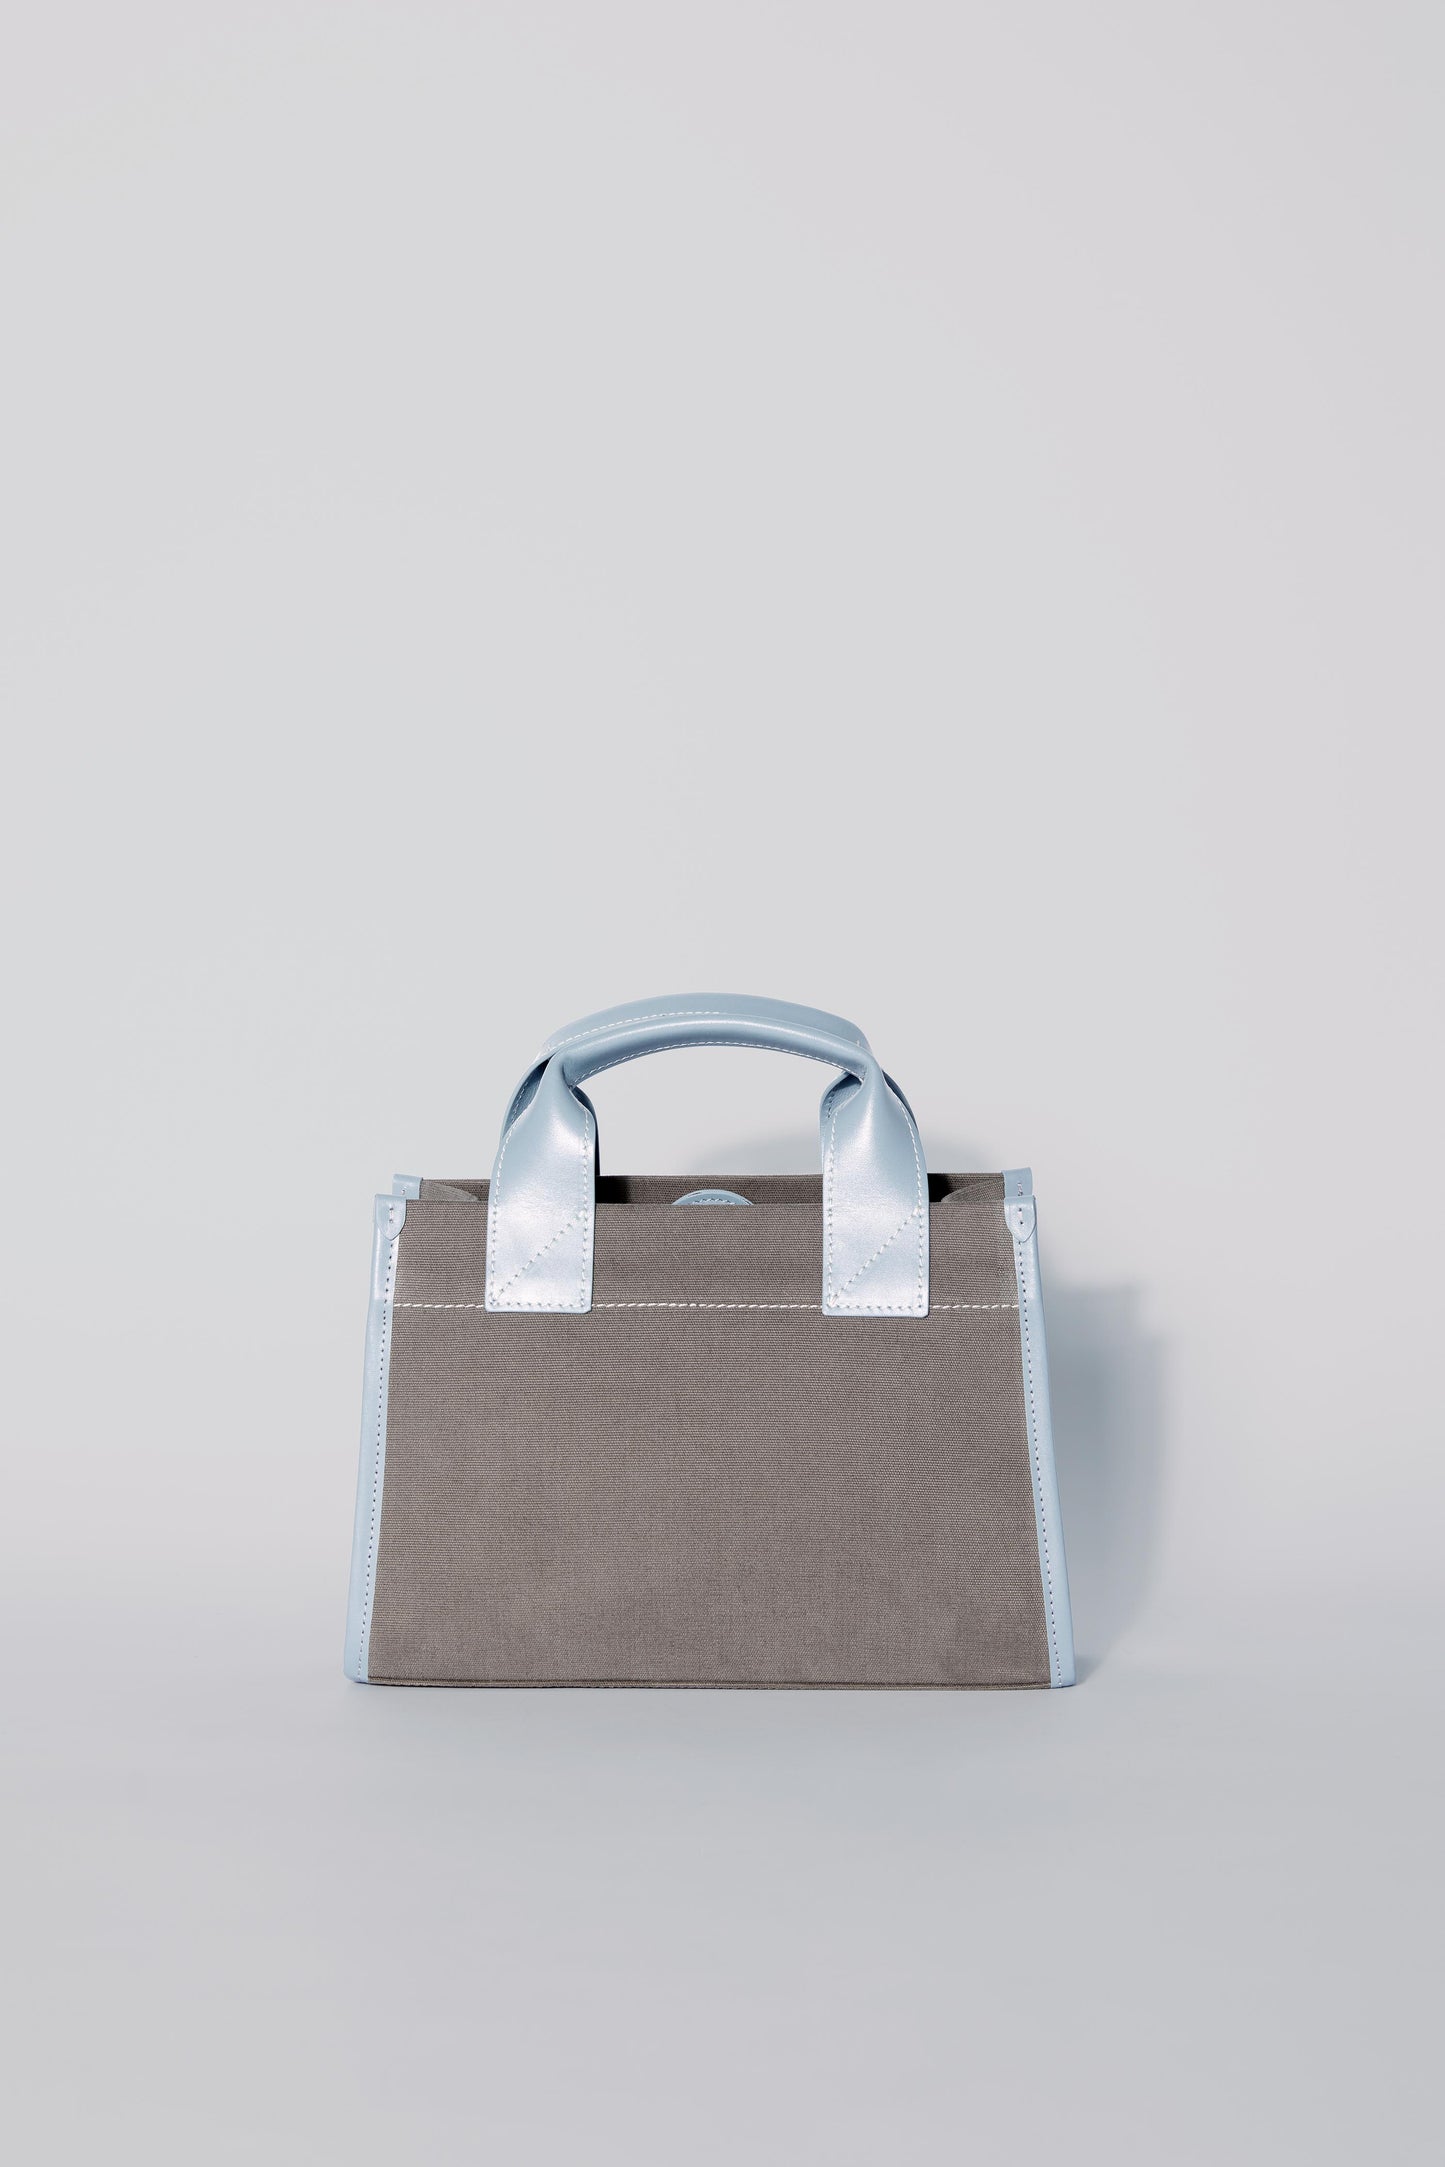 STITCHED POCKET MINI TOTE BAG IN MINK AND BLUE